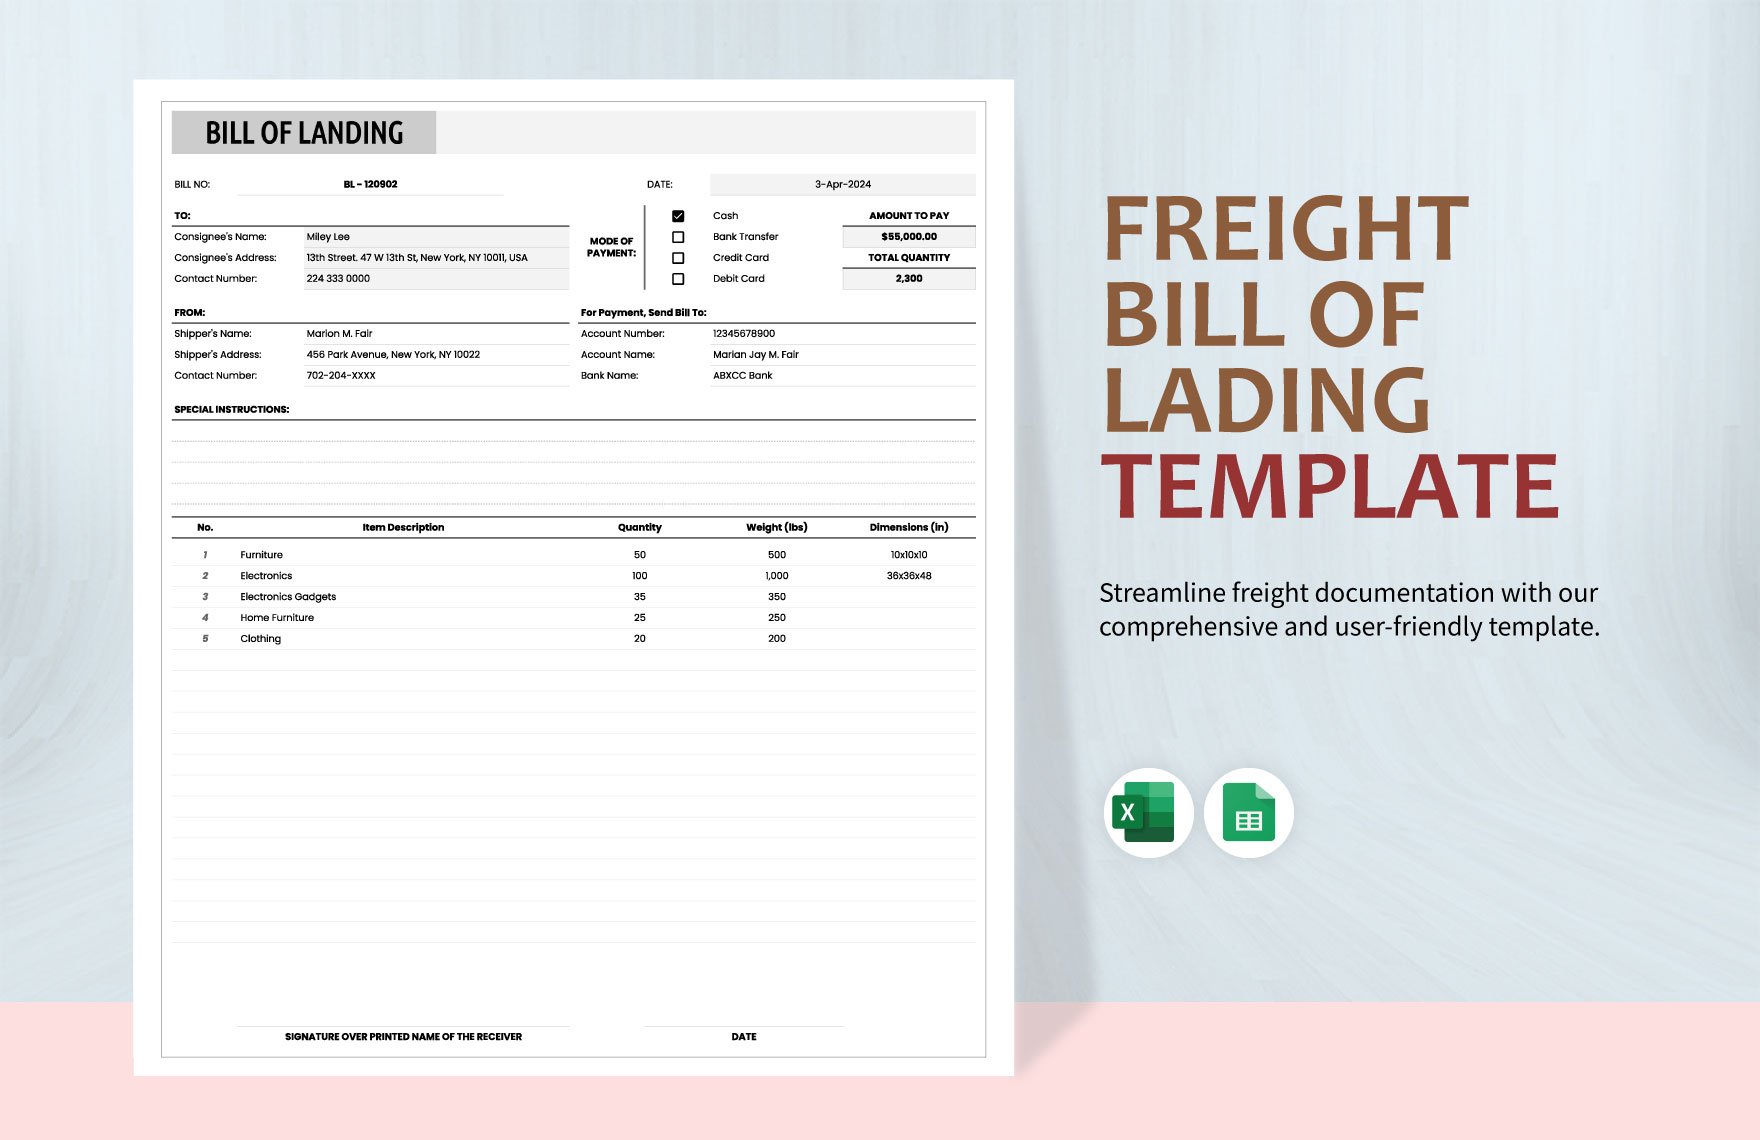 Freight Bill of Lading Template